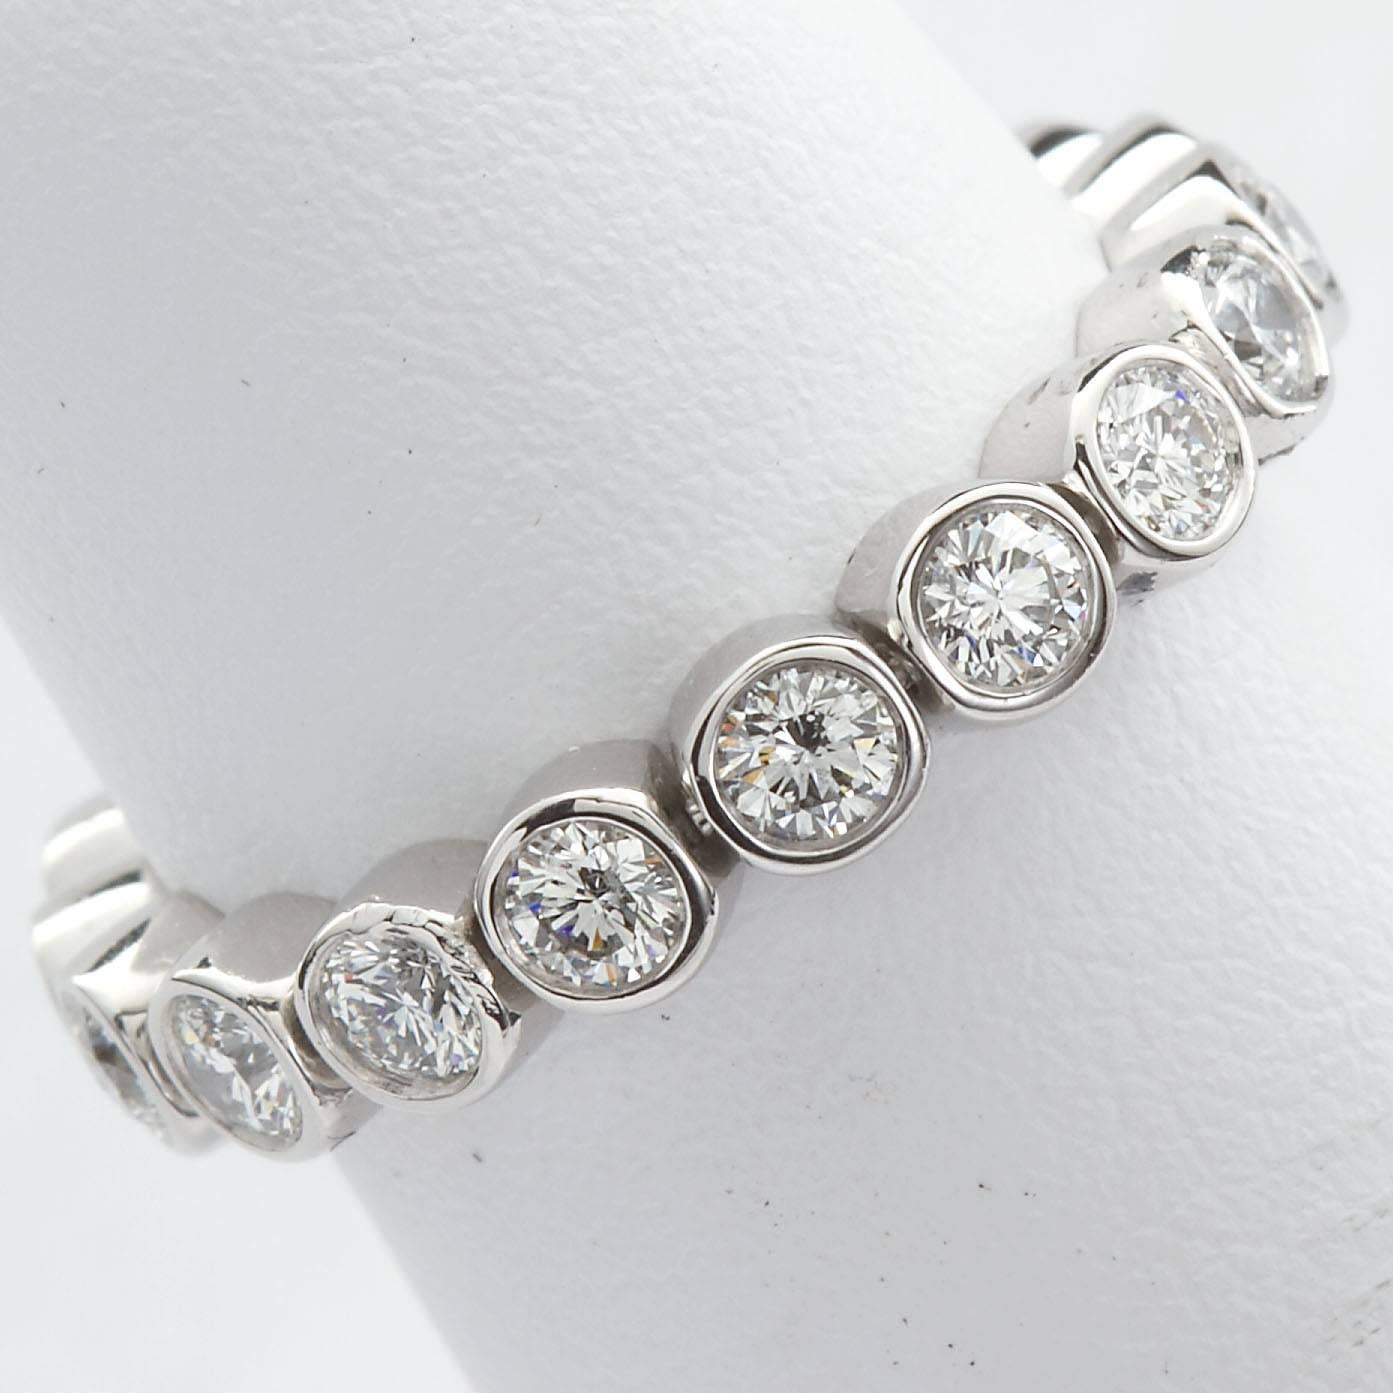 A very fine diamond in platinum flexing eternity band. Features eighteen (18) round brilliant cut diamonds in individual bezel style settings. Approx. 1.80 ctw. Signed T & Co. by Tiffany & Co. Ring size 5-1/2 US. The ring is clean and beautiful with